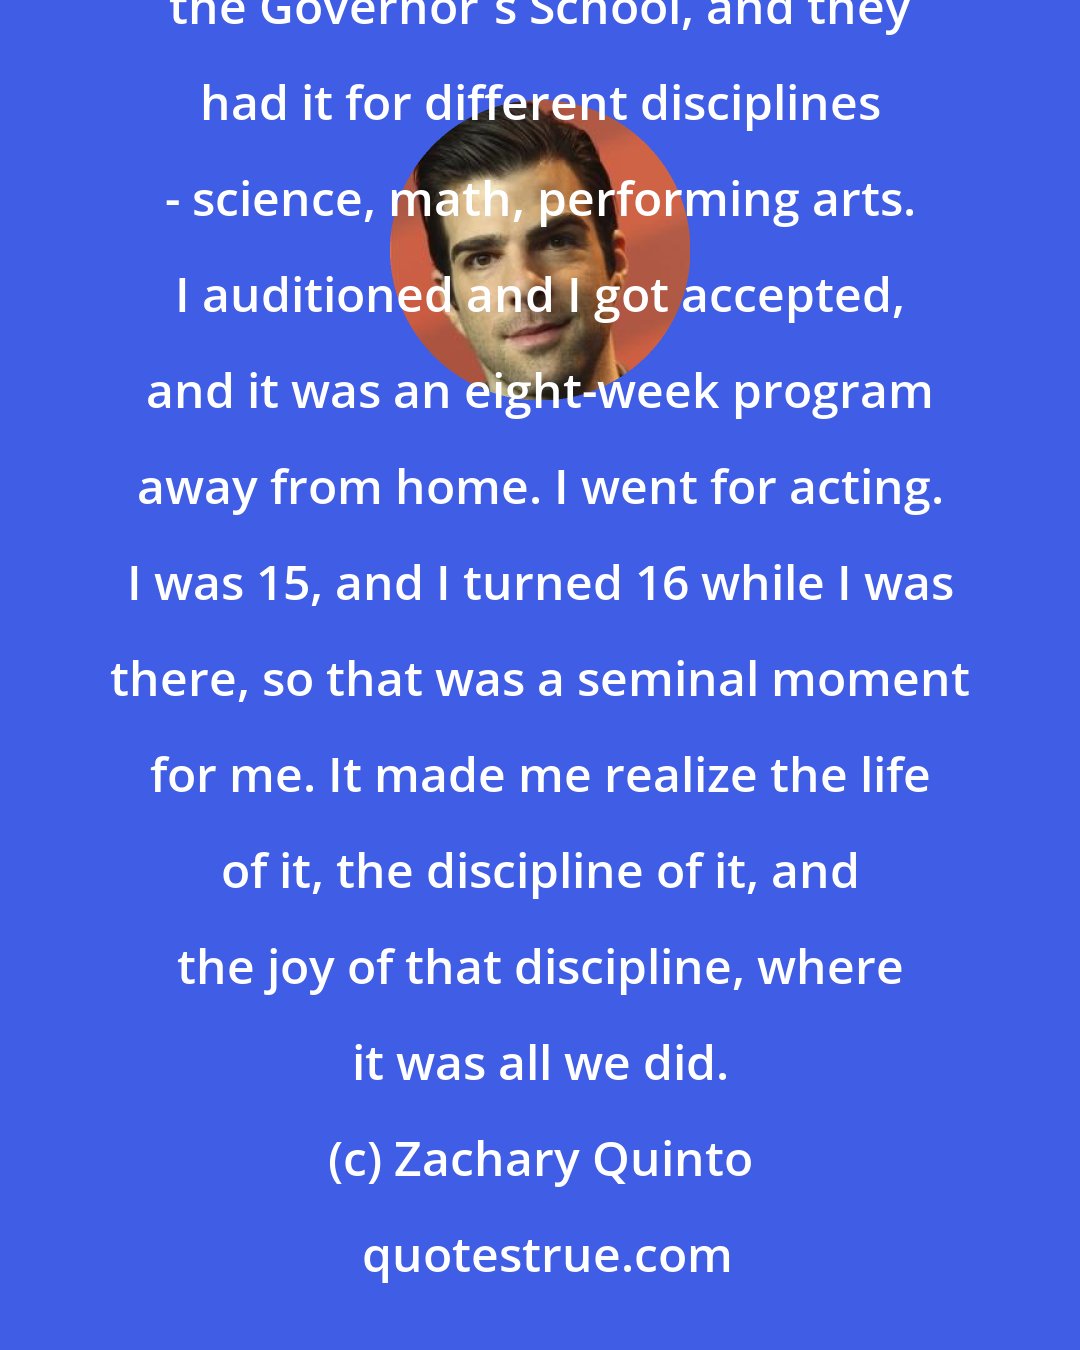 Zachary Quinto: I went away to this summer program after my junior year of high school. They used to have this thing called the Governor's School, and they had it for different disciplines - science, math, performing arts. I auditioned and I got accepted, and it was an eight-week program away from home. I went for acting. I was 15, and I turned 16 while I was there, so that was a seminal moment for me. It made me realize the life of it, the discipline of it, and the joy of that discipline, where it was all we did.